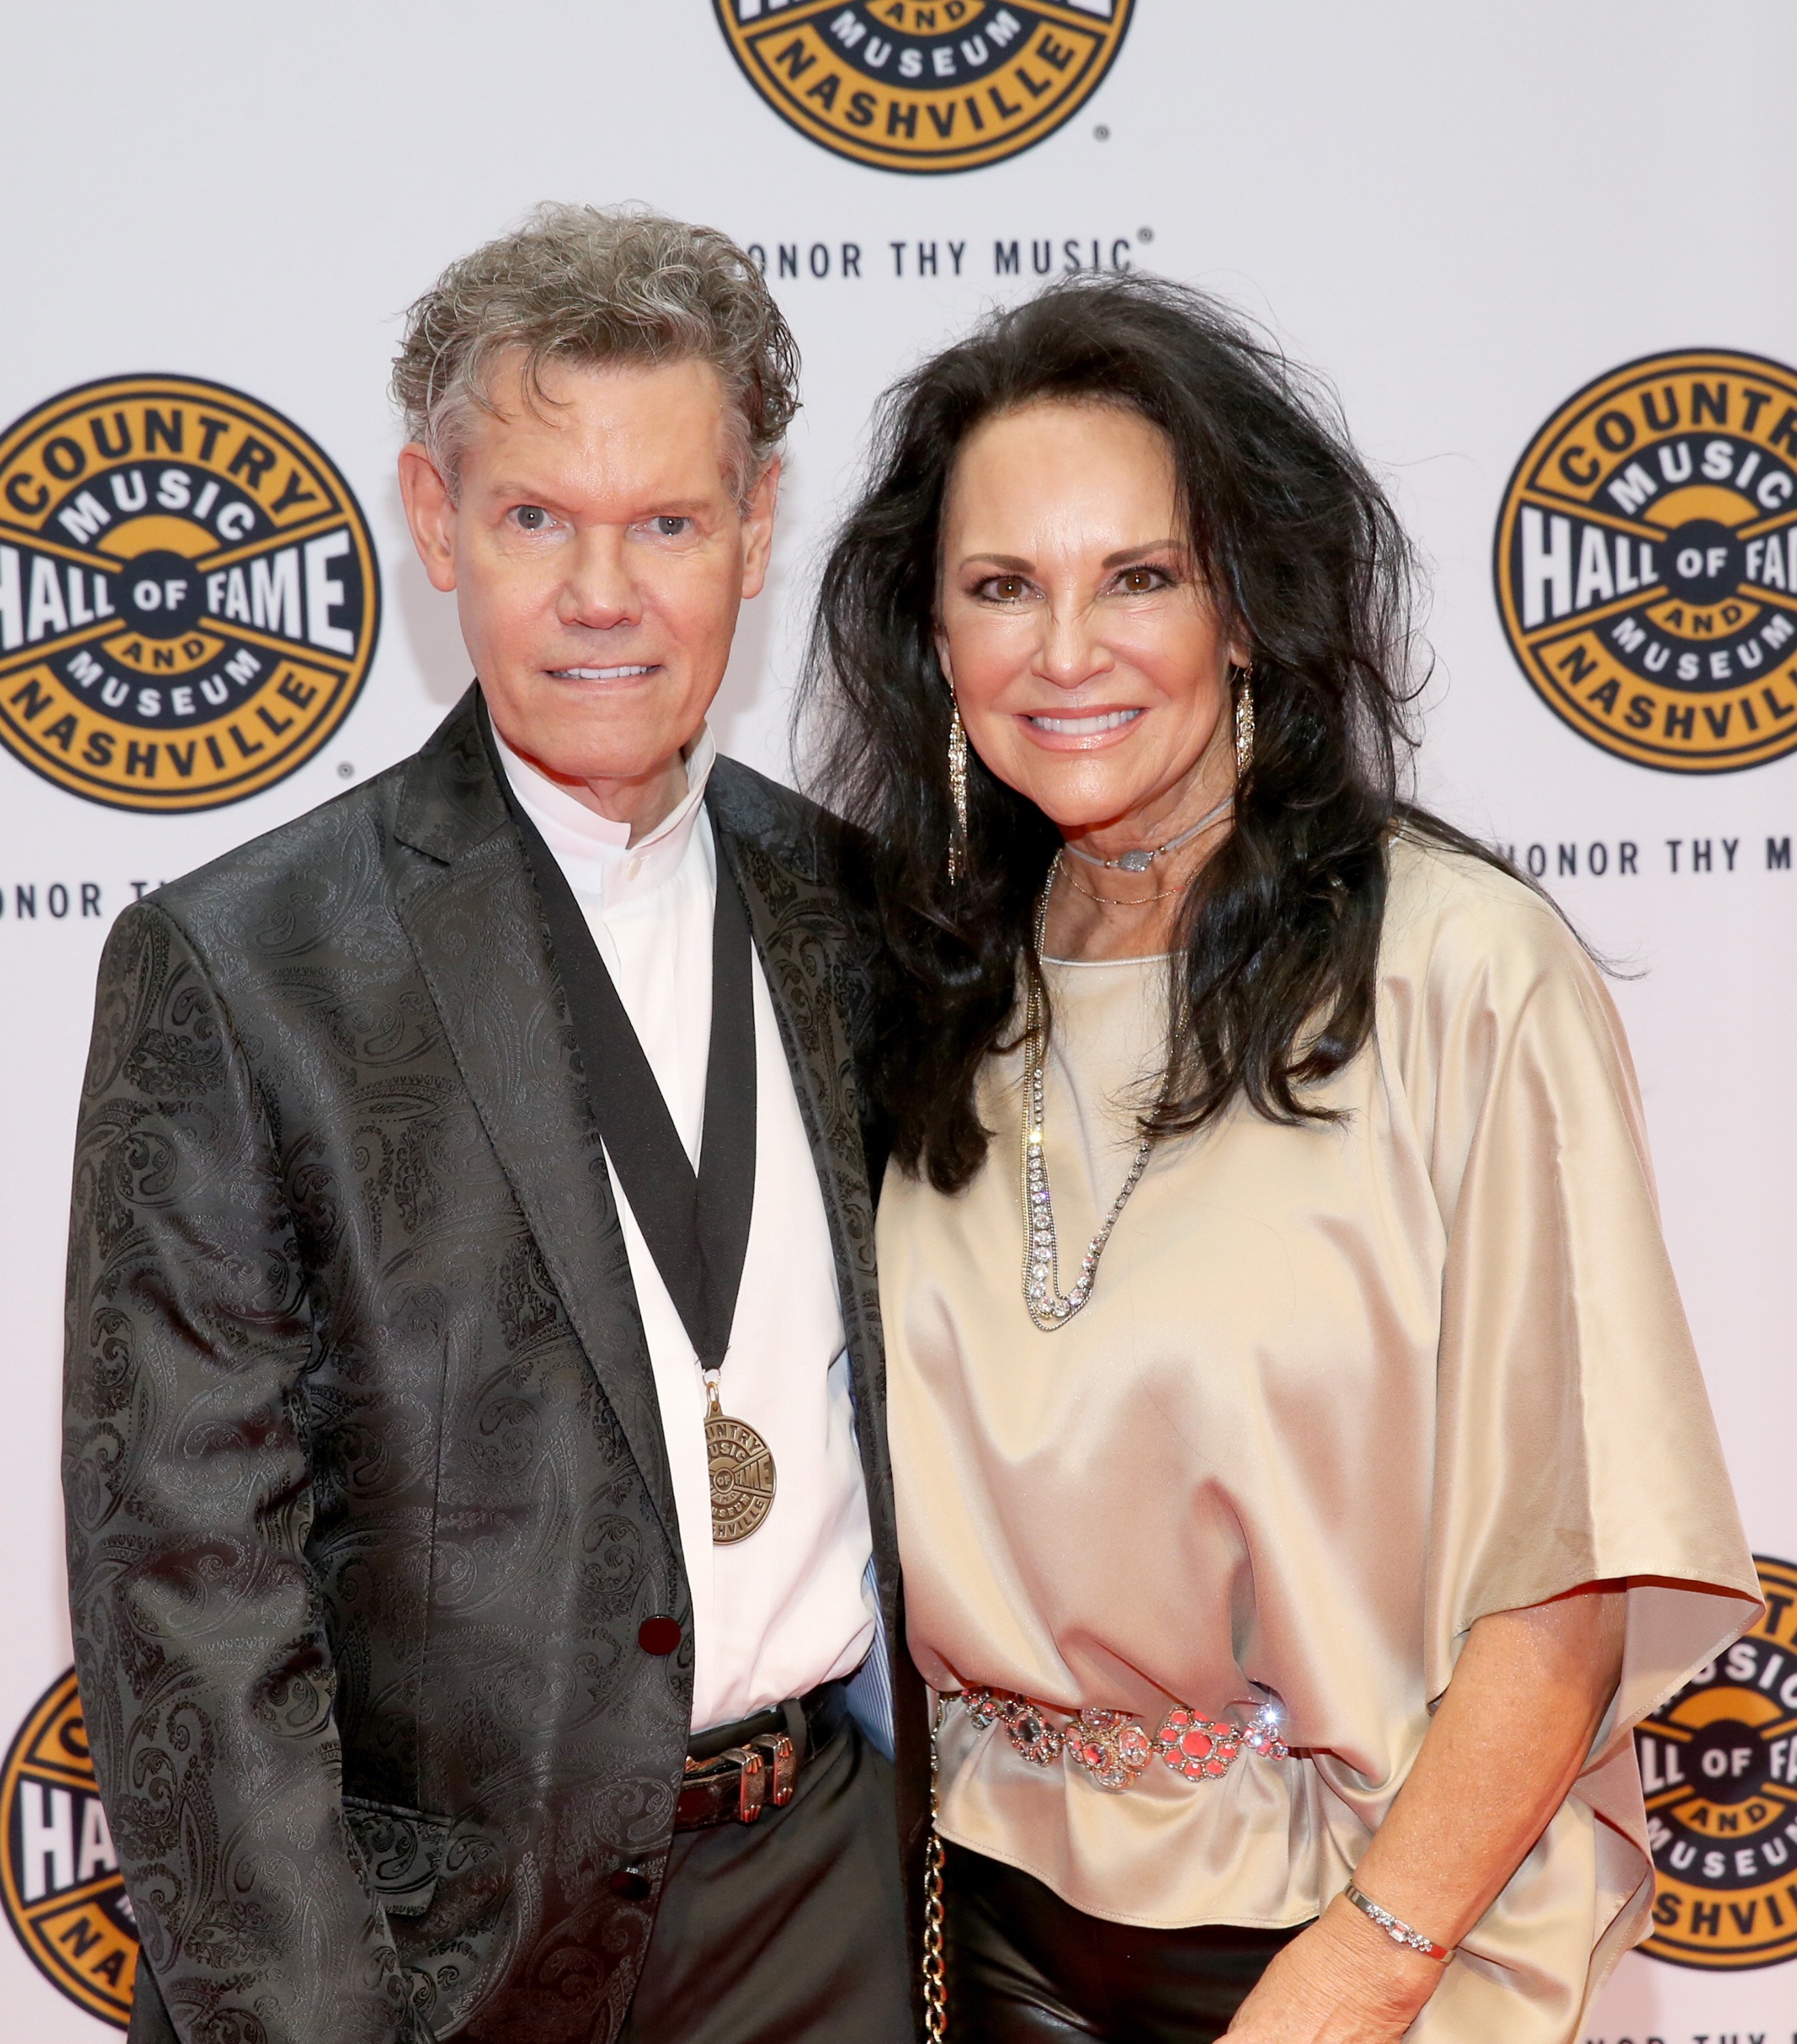 Randy Travis and Mary Beougher at the Medallion Ceremony to celebrate 2017 hall of fame inductees on October 22, 2017, in Nashville | Source: Getty Images